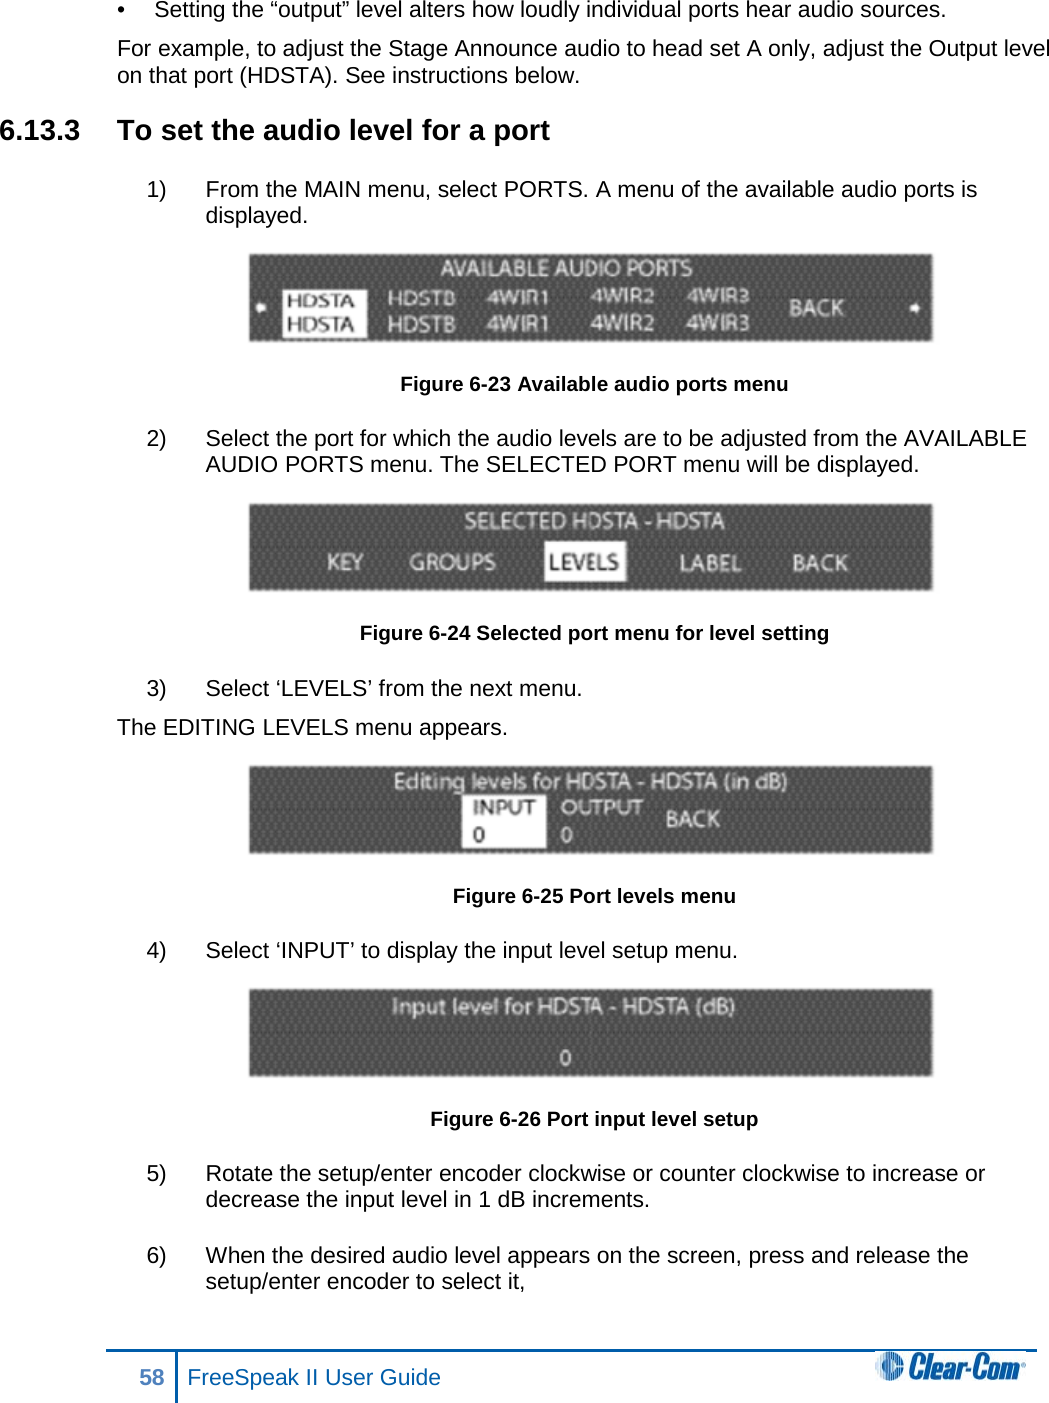 •  Setting the “output” level alters how loudly individual ports hear audio sources. For example, to adjust the Stage Announce audio to head set A only, adjust the Output level on that port (HDSTA). See instructions below.  6.13.3 To set the audio level for a port 1) From the MAIN menu, select PORTS. A menu of the available audio ports is displayed.  Figure 6-23 Available audio ports menu 2) Select the port for which the audio levels are to be adjusted from the AVAILABLE AUDIO PORTS menu. The SELECTED PORT menu will be displayed.  Figure 6-24 Selected port menu for level setting 3) Select ‘LEVELS’ from the next menu. The EDITING LEVELS menu appears.   Figure 6-25 Port levels menu 4) Select ‘INPUT’ to display the input level setup menu.   Figure 6-26 Port input level setup 5) Rotate the setup/enter encoder clockwise or counter clockwise to increase or decrease the input level in 1 dB increments.  6) When the desired audio level appears on the screen, press and release the setup/enter encoder to select it,  58 FreeSpeak II User Guide  